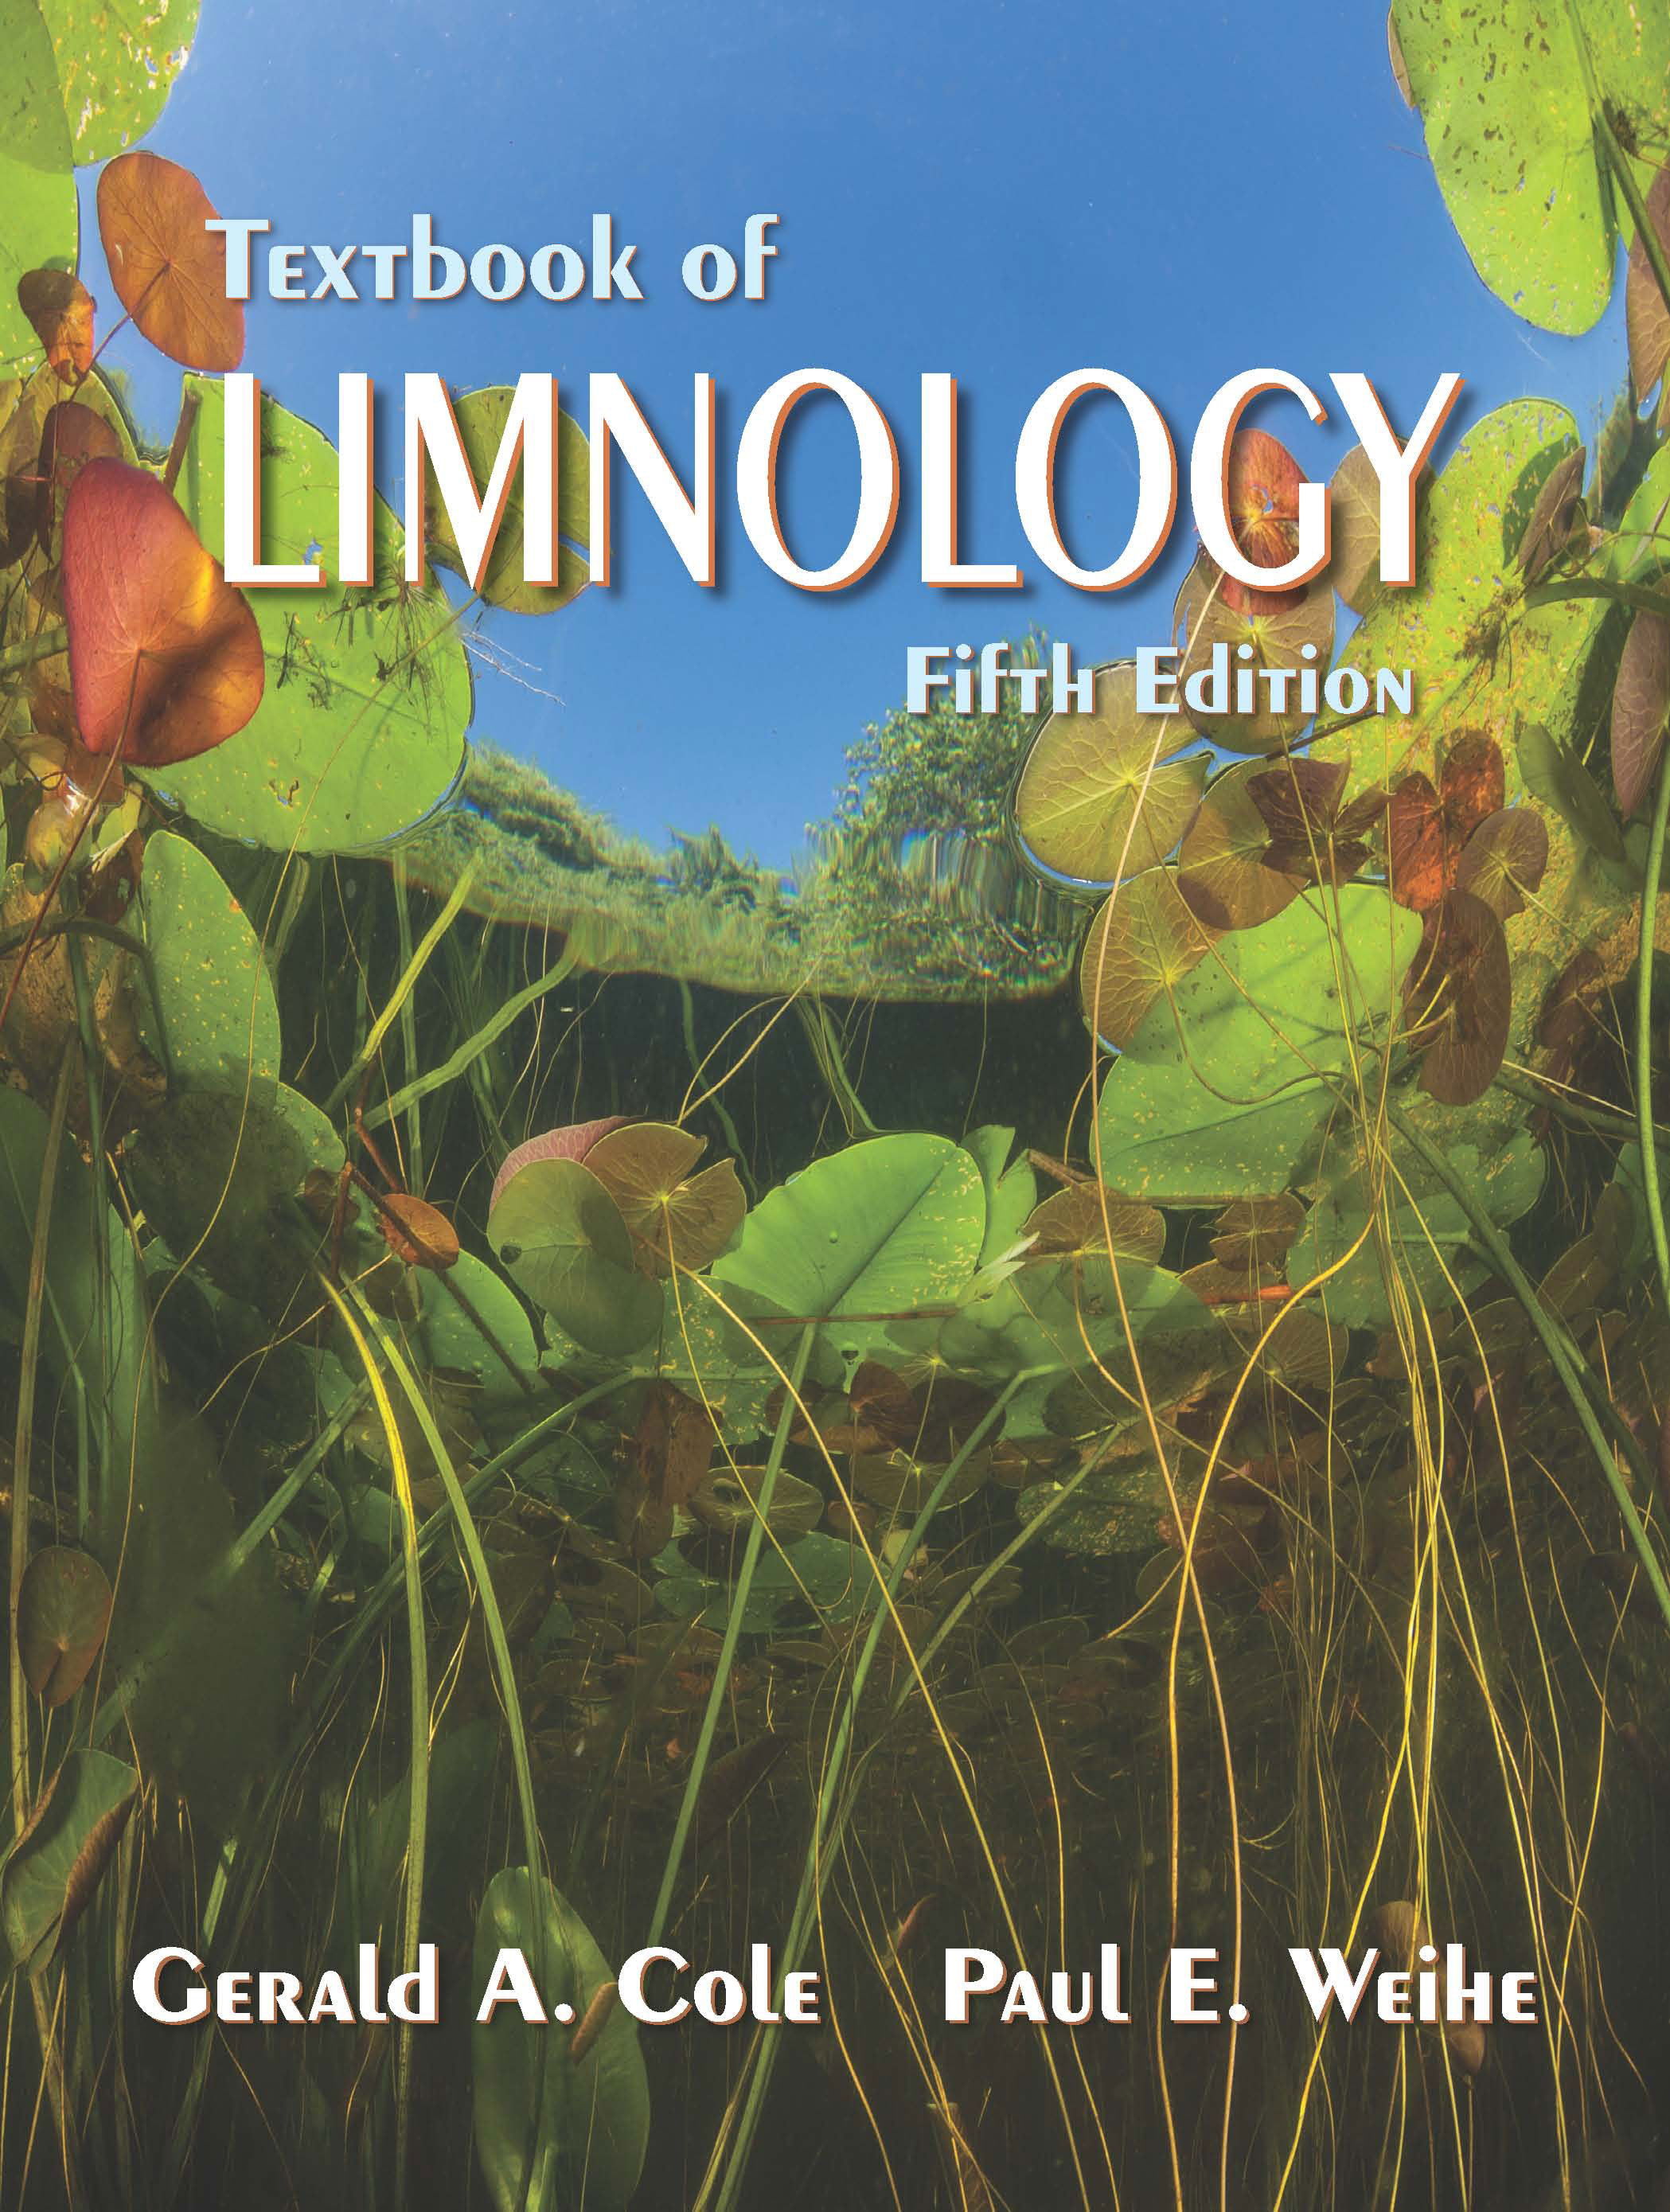 Textbook of Limnology:  by Gerald A. Cole, Paul E. Weihe